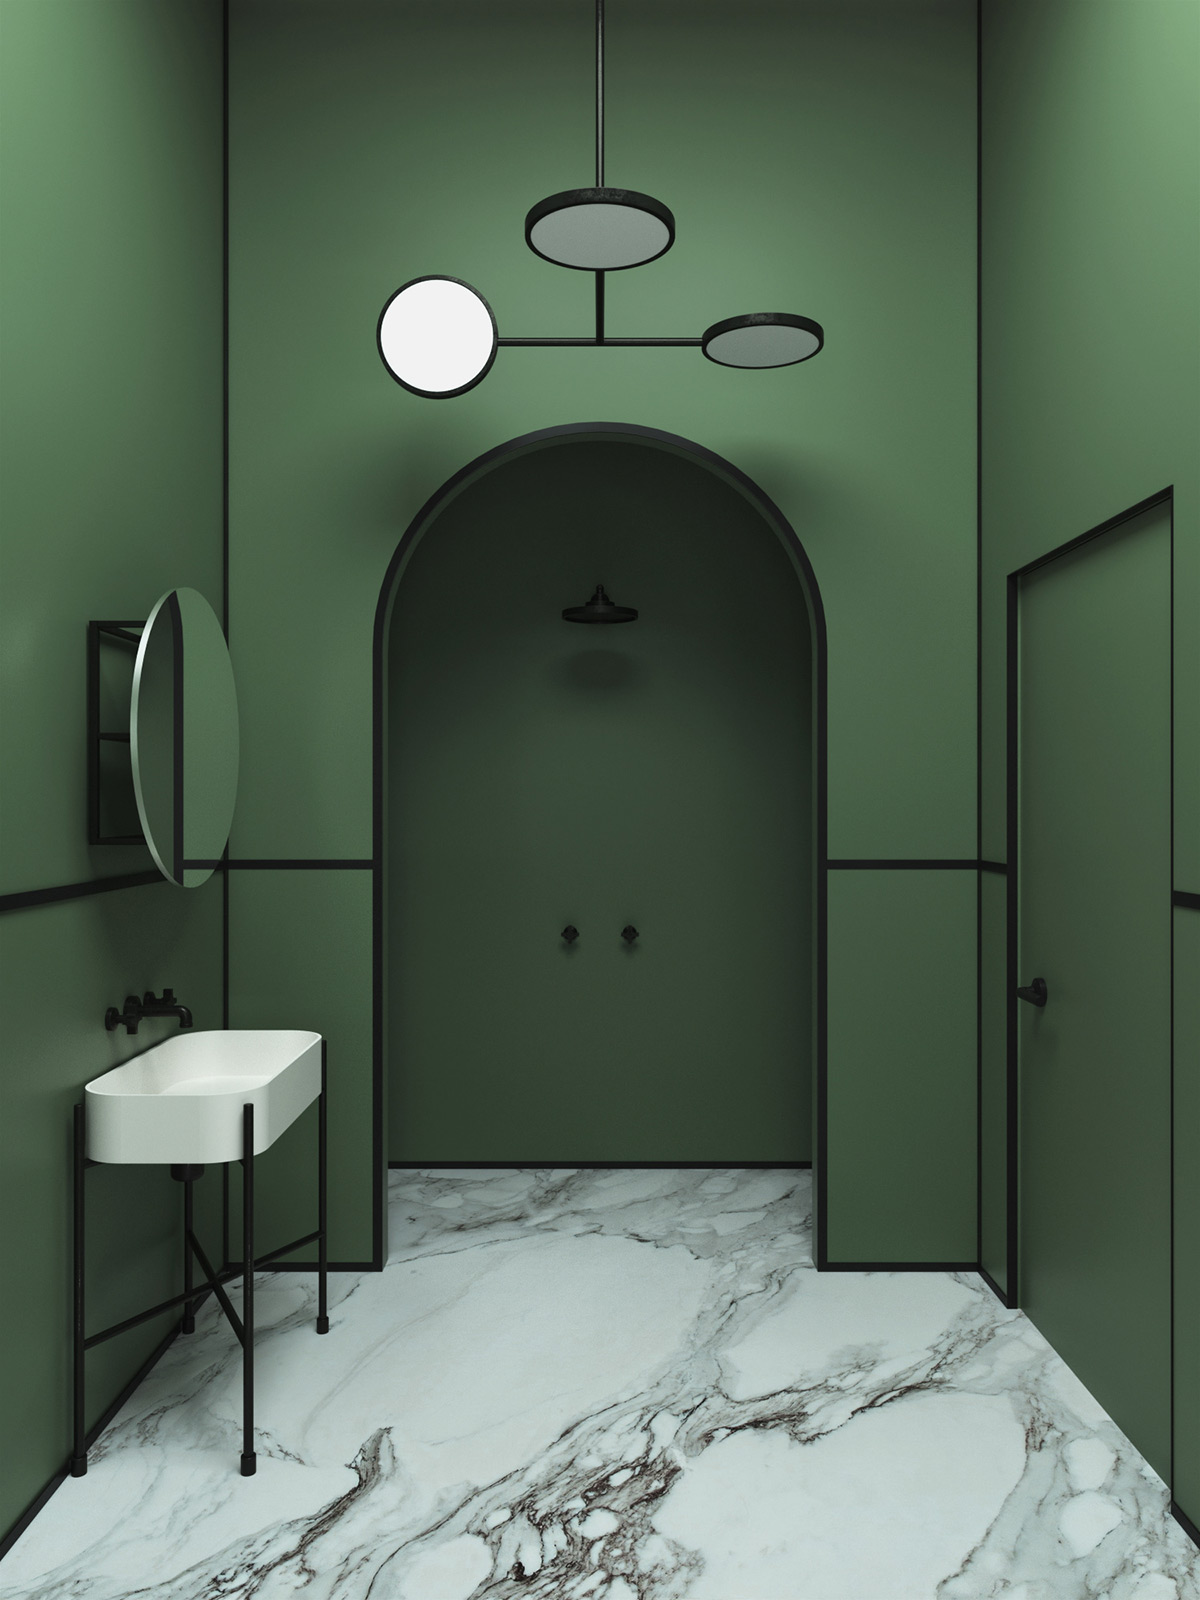 Give your green décor scheme a bold black outline that defines the edges of doorways, archways, and windows.